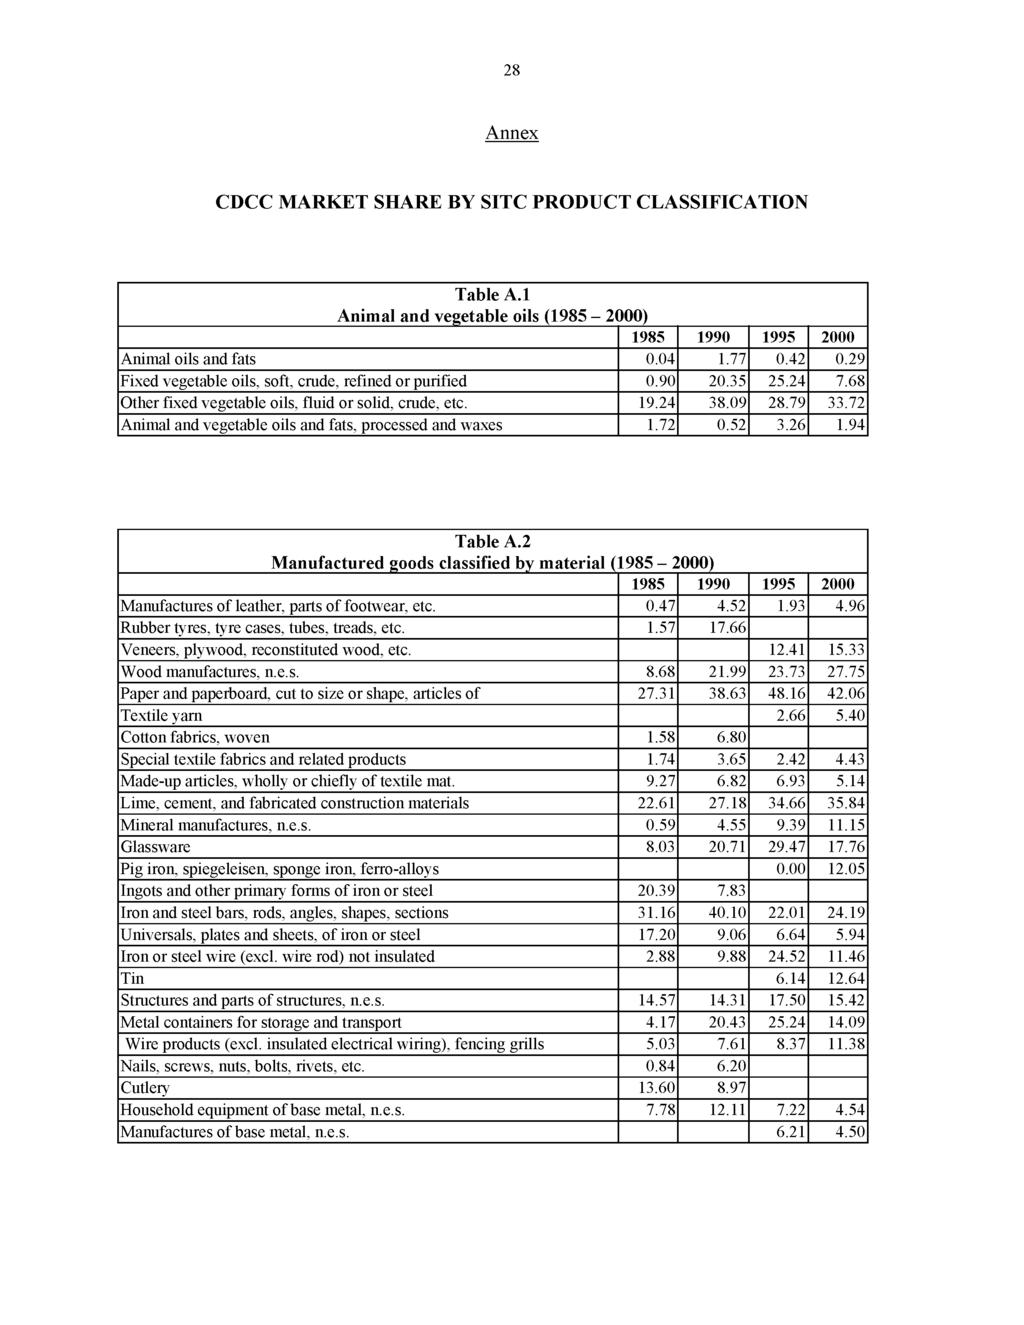 28 Annex CDCC M ARKET SHARE BY SITC PRODUCT CLASSIFICATION Table A.1 Animal and vegetable oils (1985-2000) 1985 1990 1995 2000 Animal oils and fats 0.04 1.77 0.42 0.